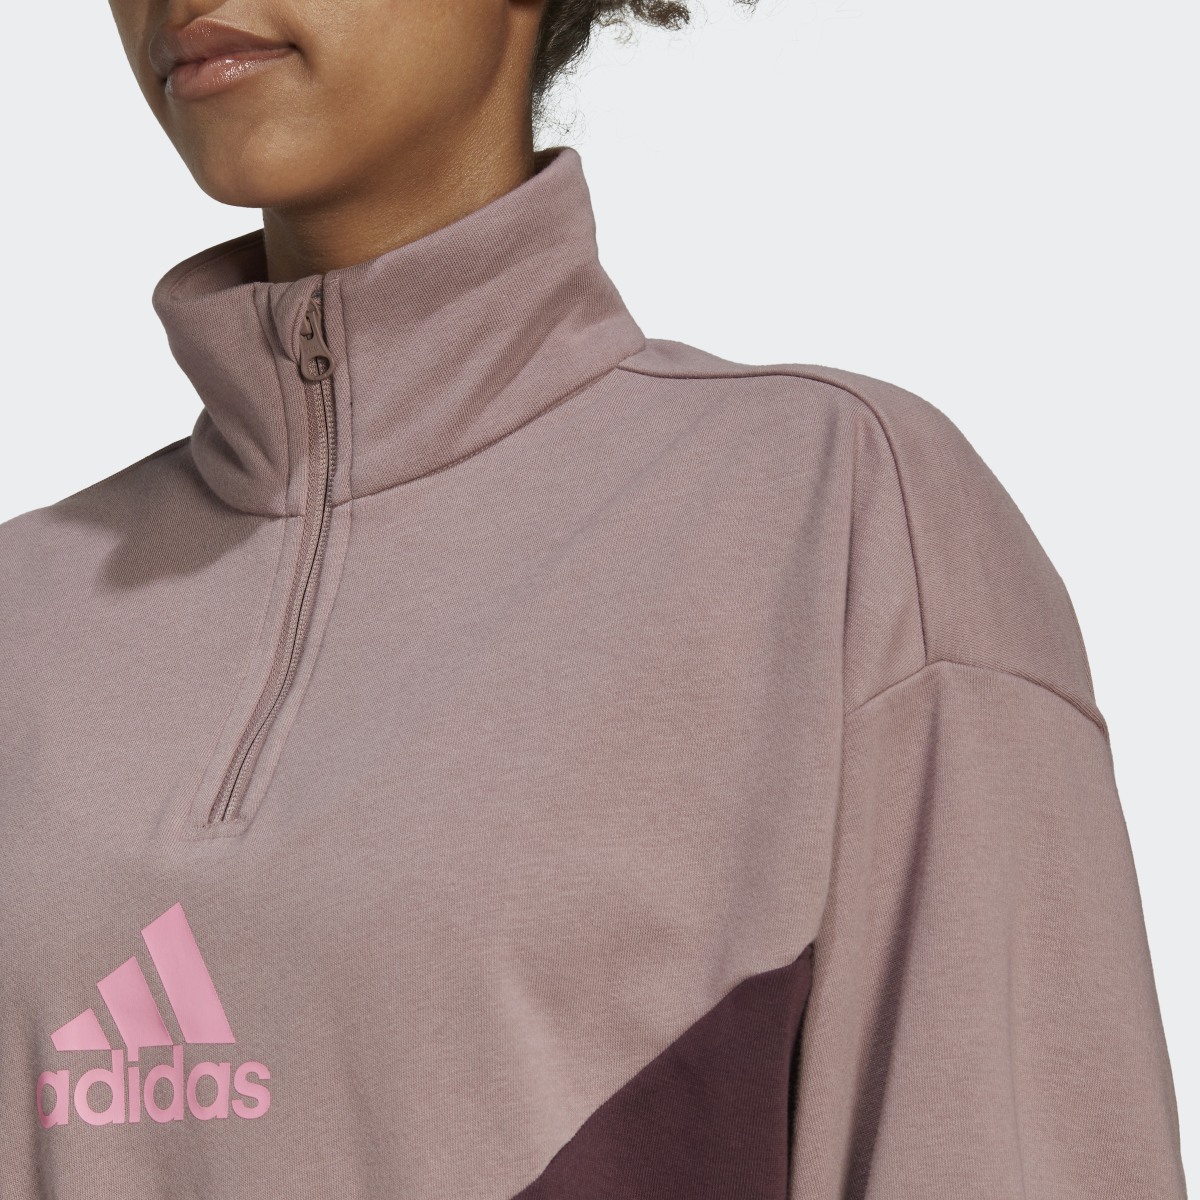 Adidas Half-Zip and Tights Track Suit. 6